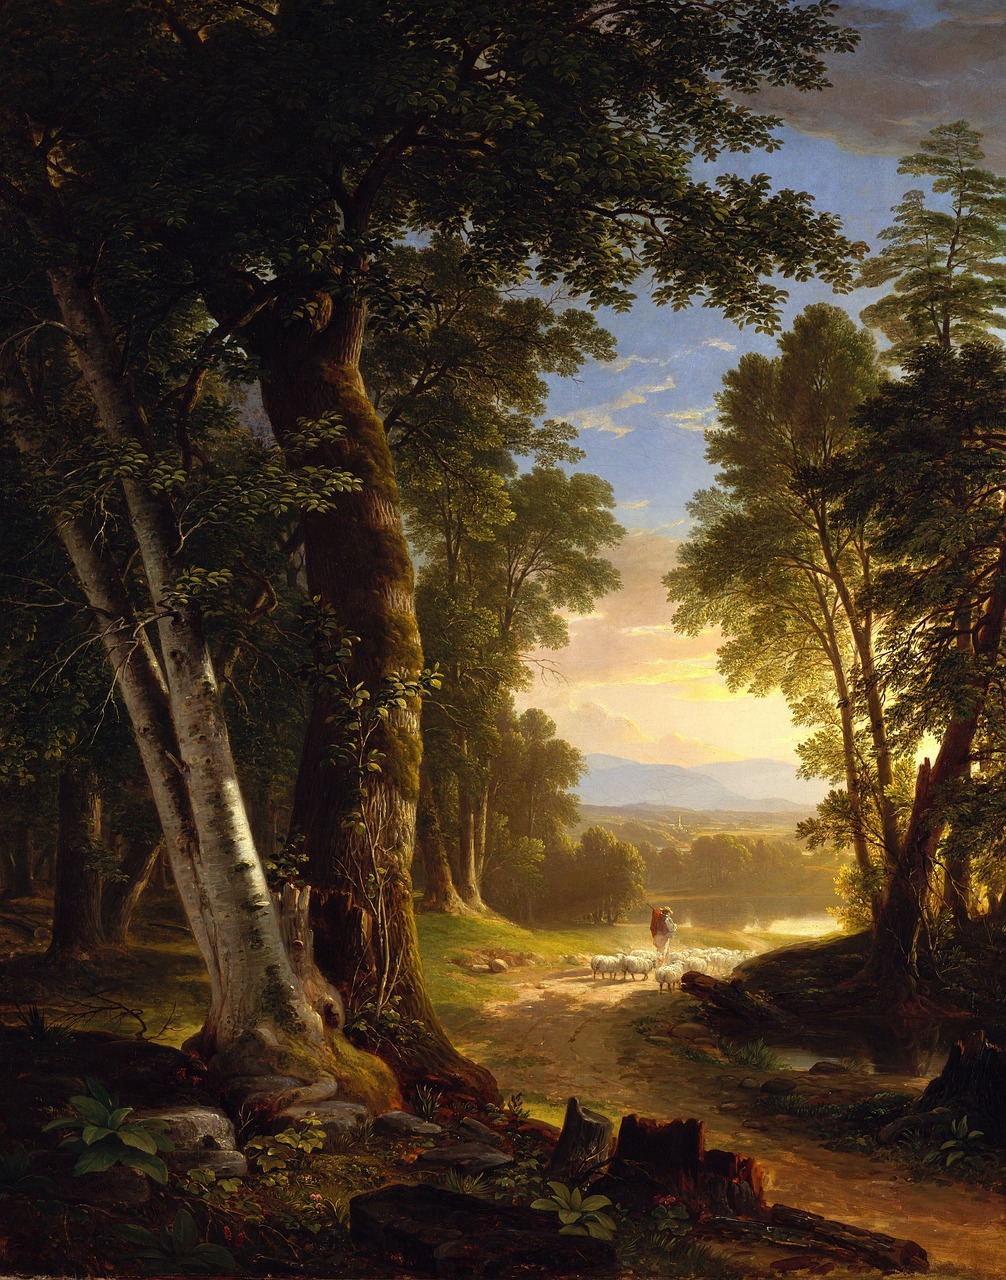 a painting of a person riding a horse in a wooded area, by Asher Brown Durand, hudson river school, tree-lined path at sunset, forest with lake, overlooking a valley with trees, beautiful late afternoon